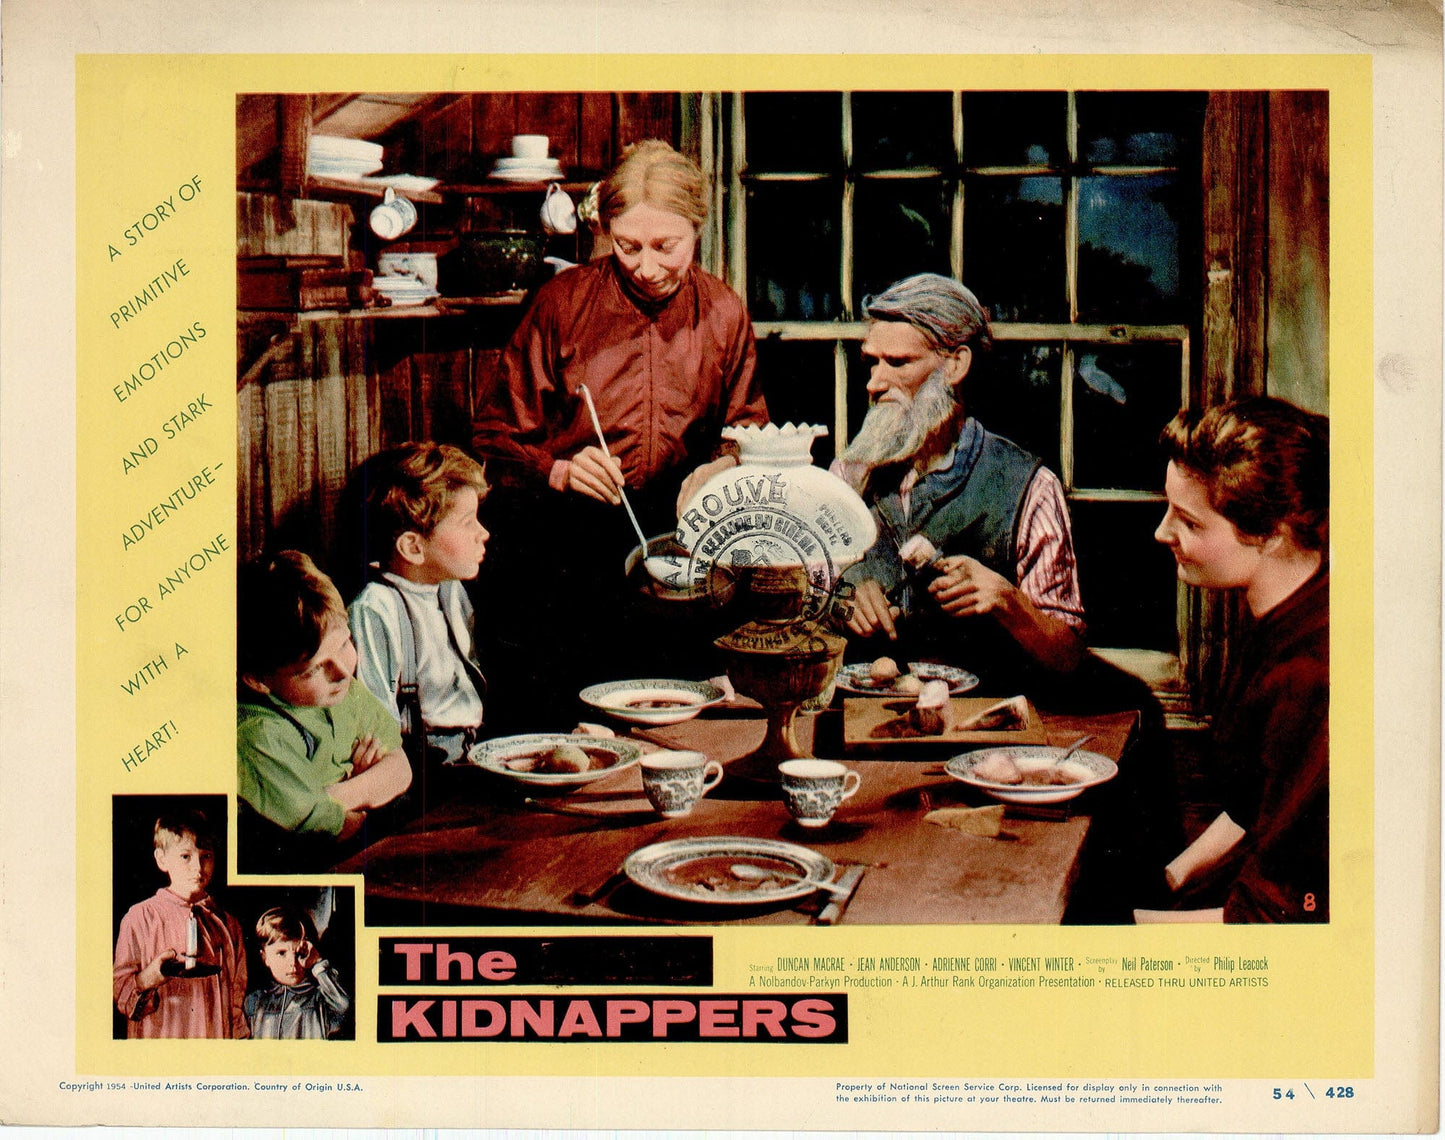 The Little Kidnappers - Movie Lobby Card